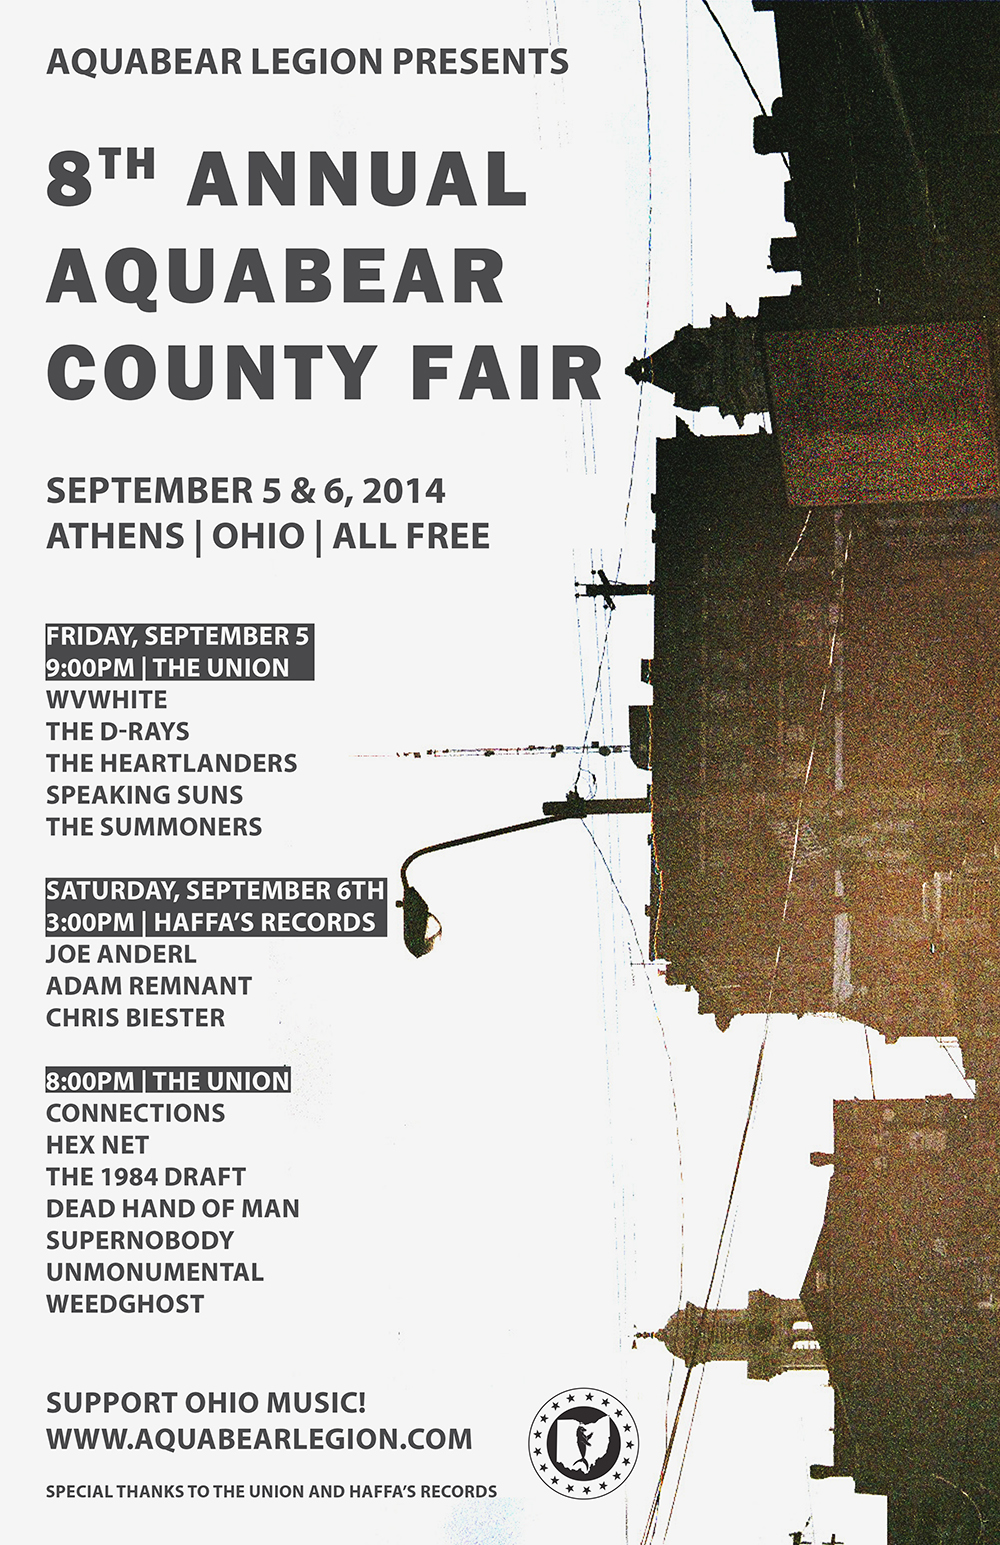 8th annual Aquabear County Fair is this weekend: September 5-6 in Athens, Ohio and is FREE